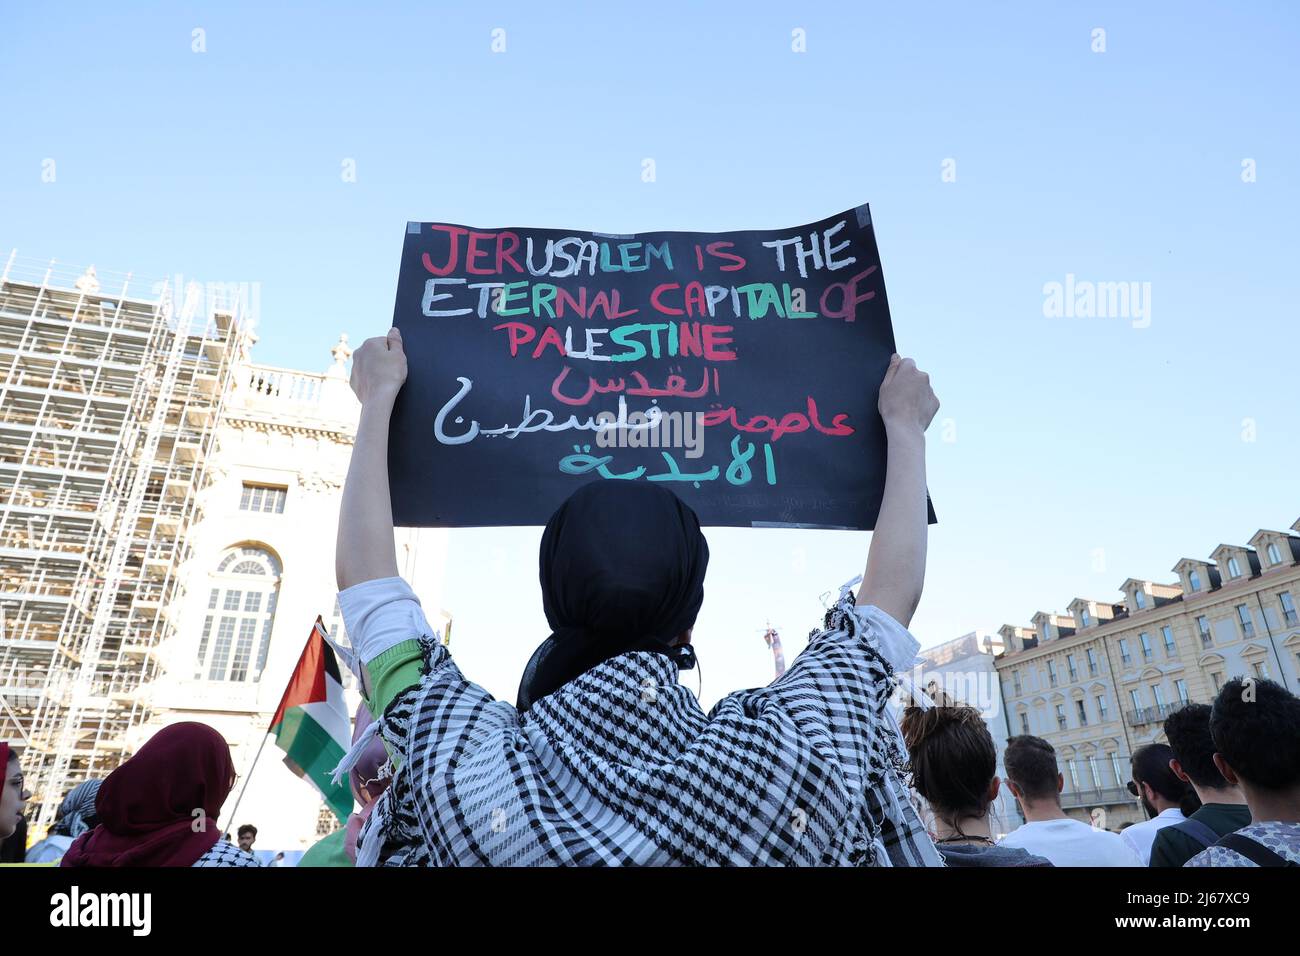 Turin, Italy. 28th April, 2022. A woman protests against the raids of Israeli forces in West Bank and restrictions on access to holy sites in Jerusalem during the Ramadan time holding a placard showing:“Jerusalem is the eternal capital of Palestine”. Credit: MLBARIONA/Alamy Live News Stock Photo